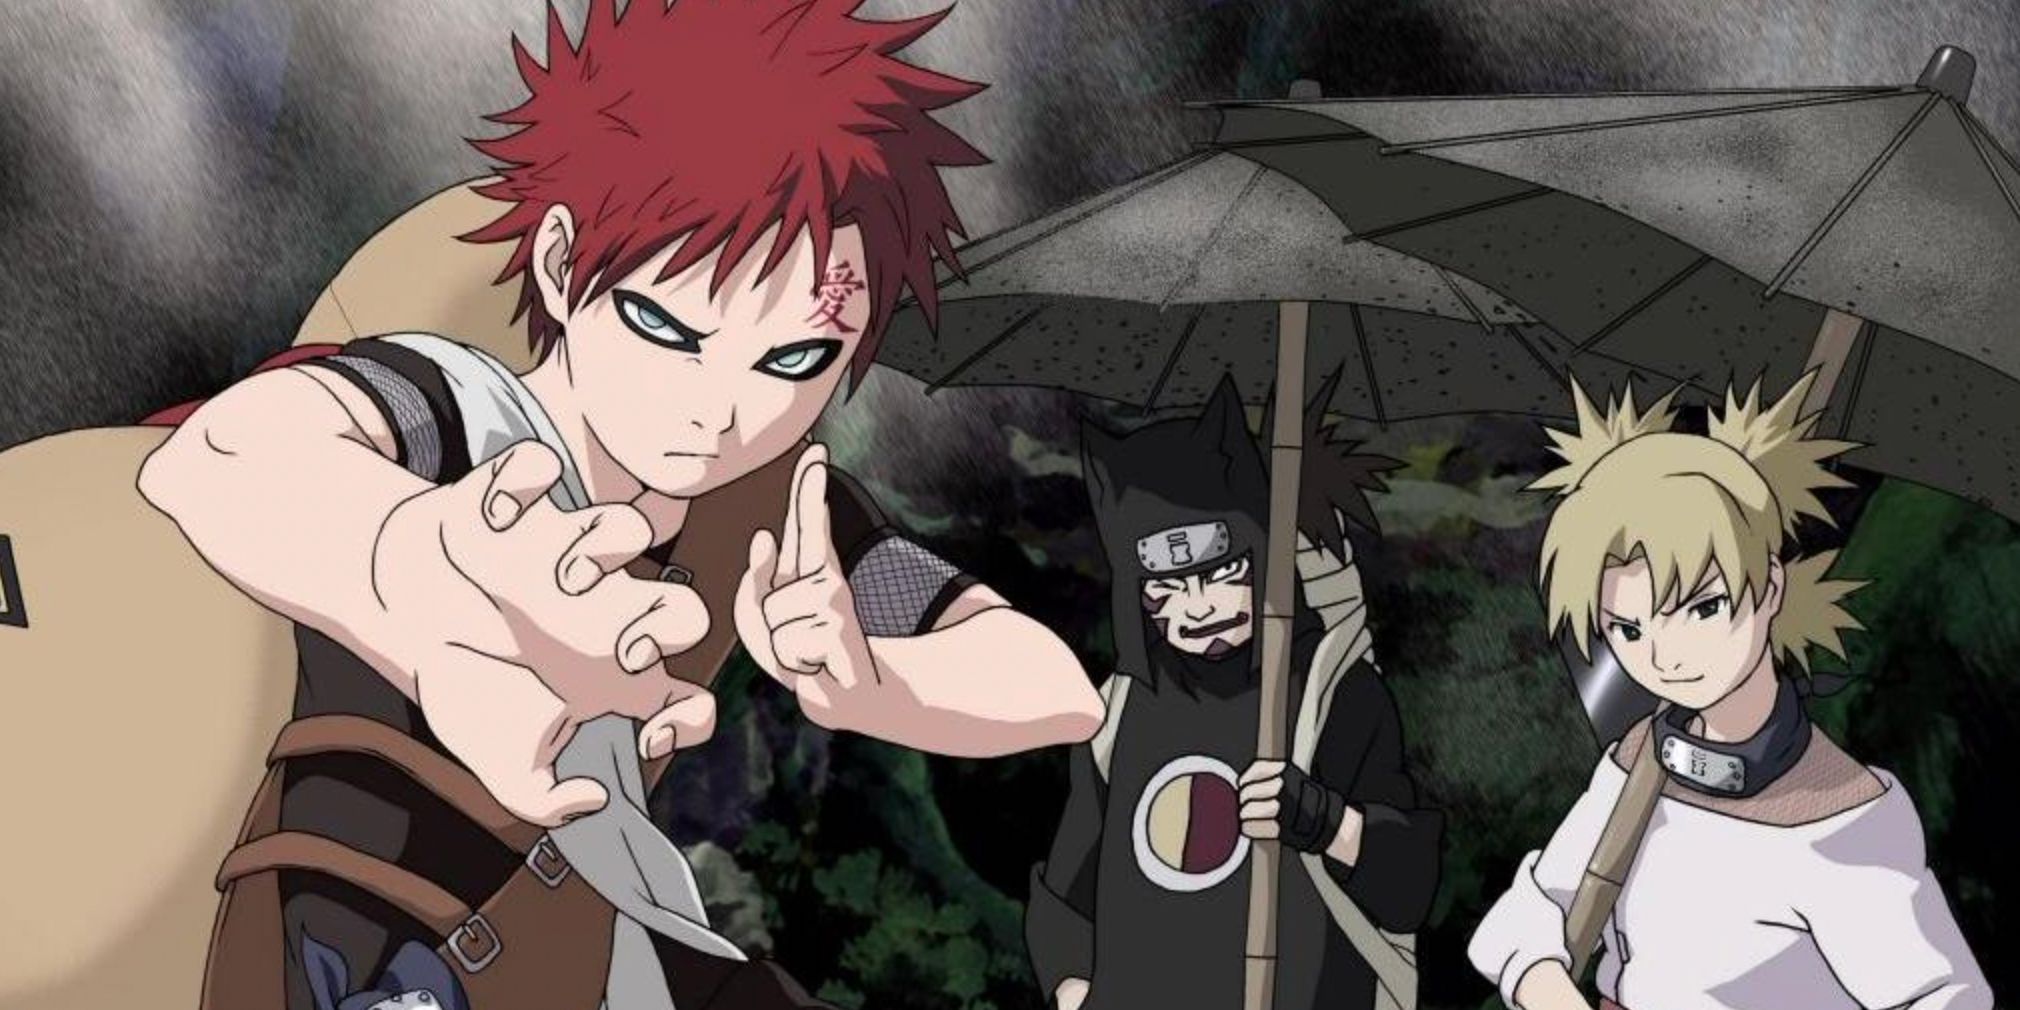 Gaara is ready in a fighting stance while Kankuro and Temari hold umbrellas in a promotional image for Naruto